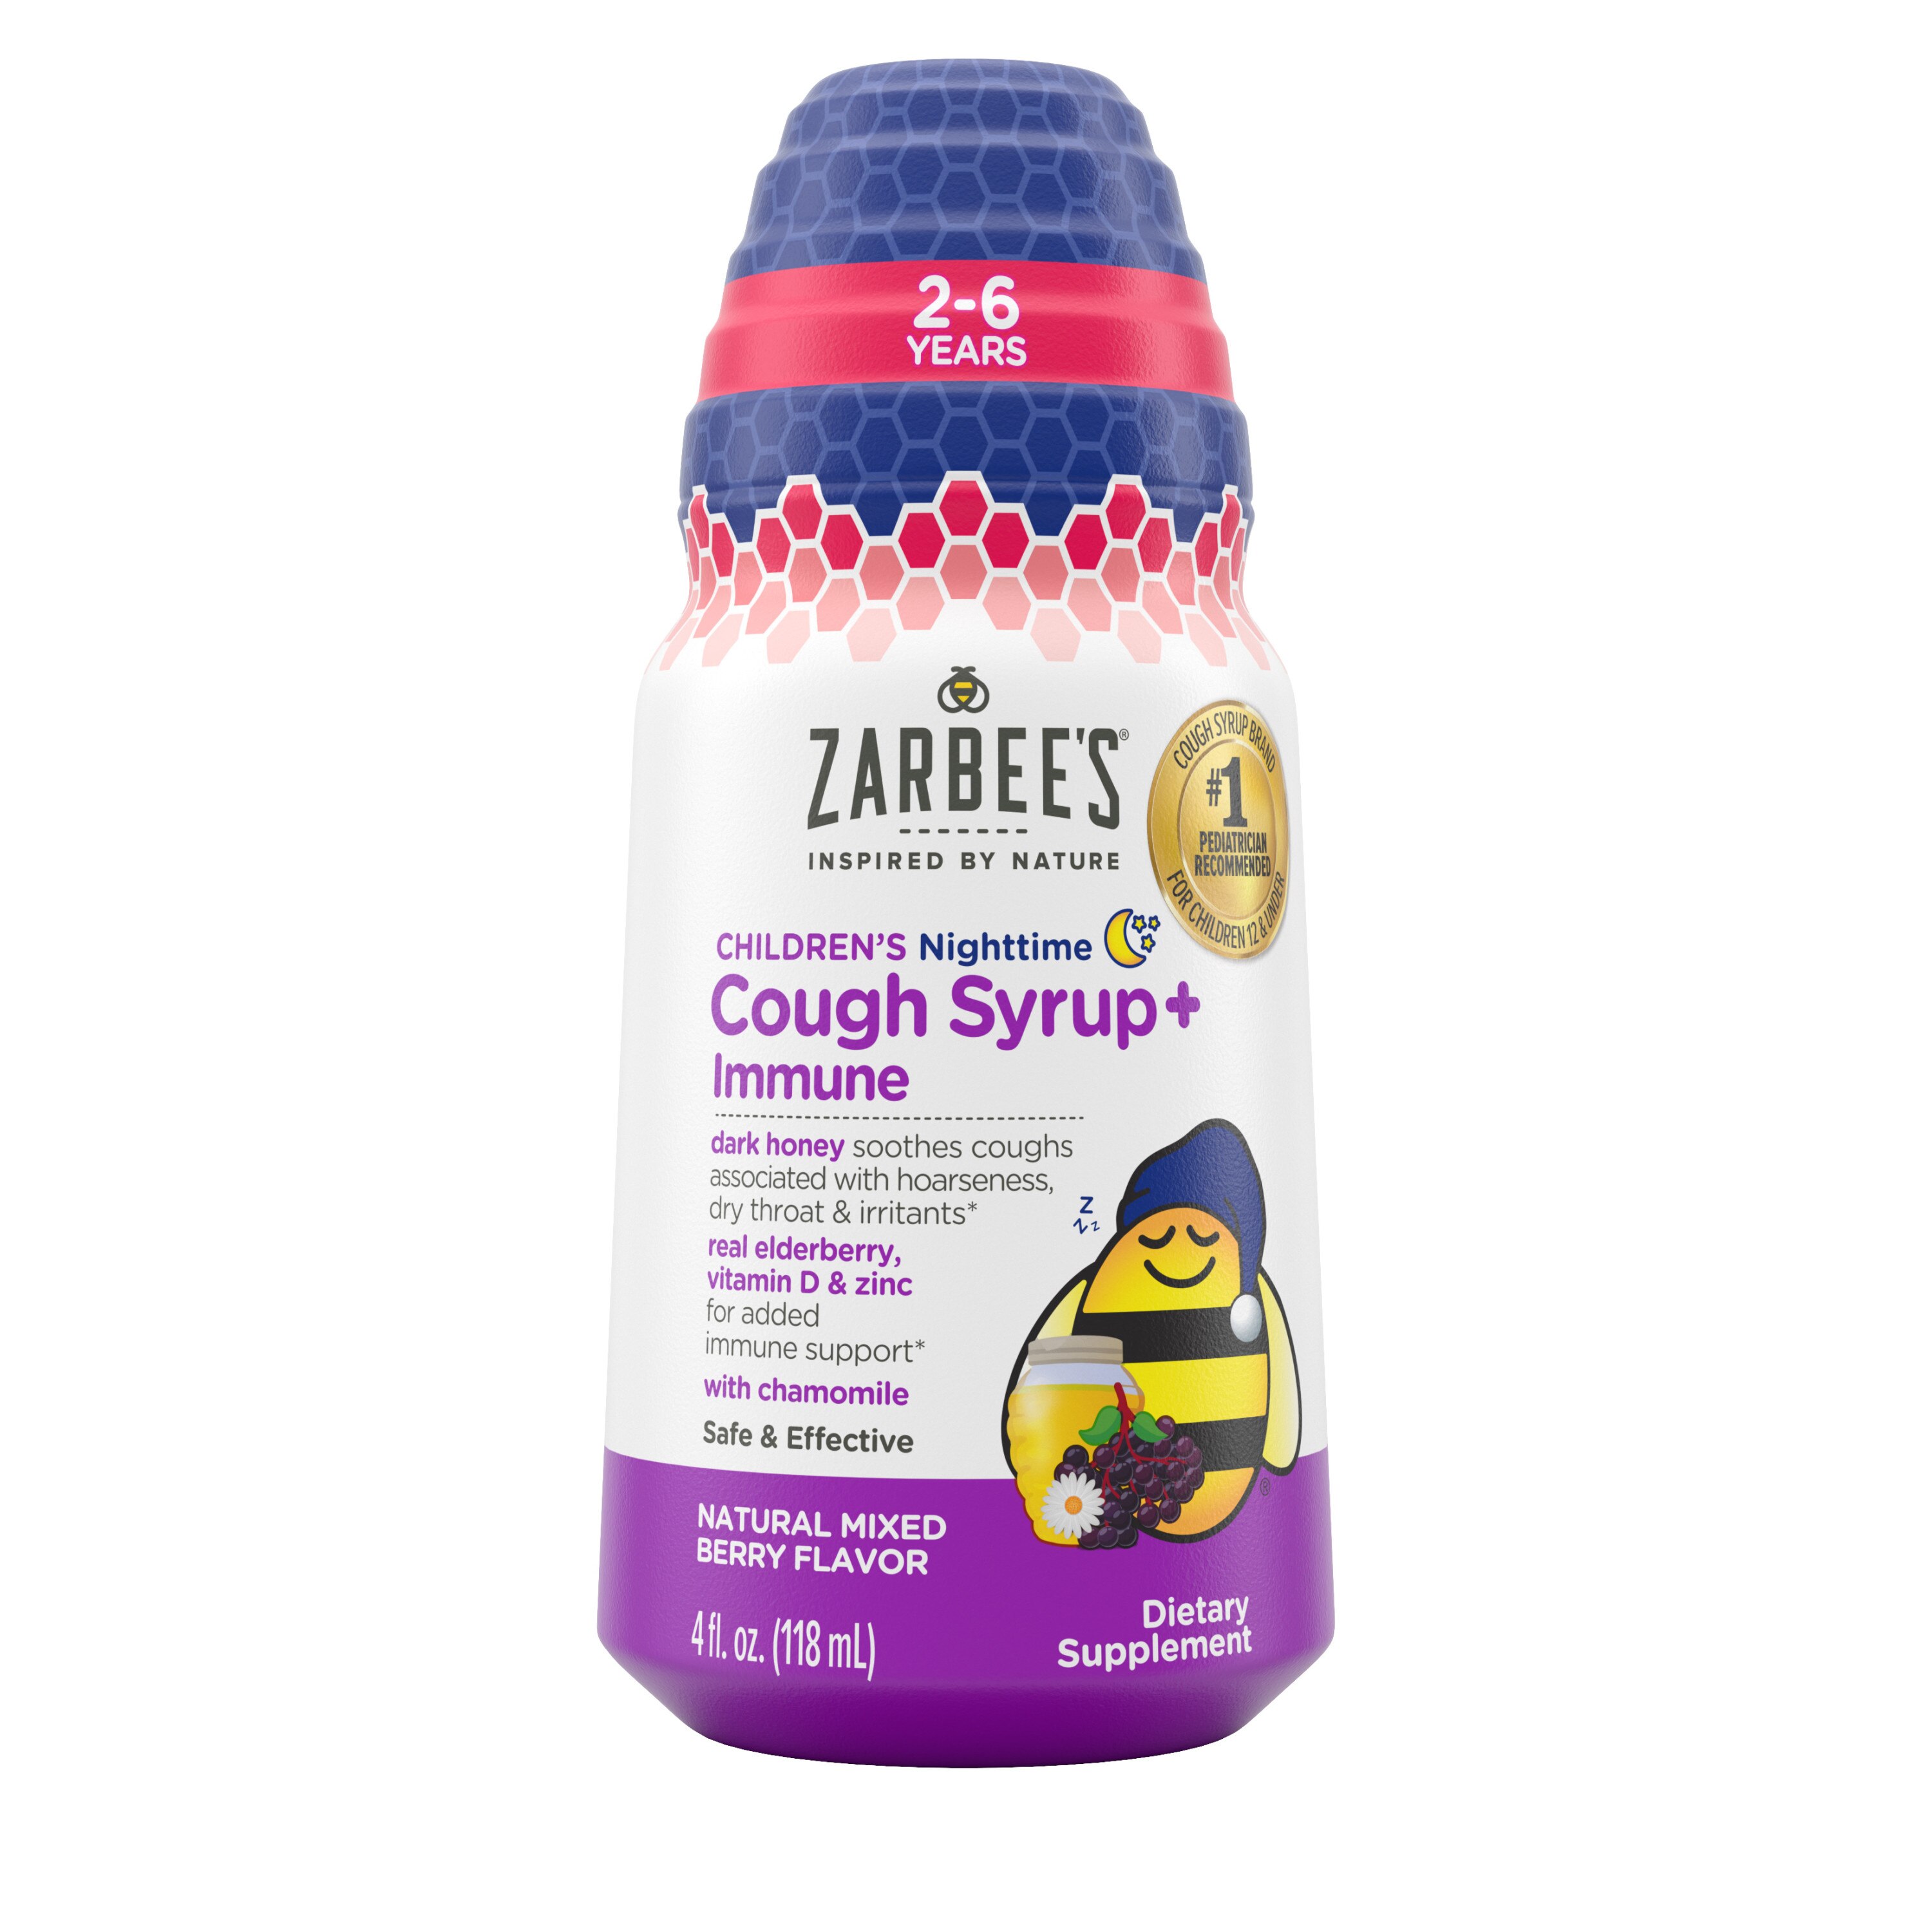 Zarbee's Kids Cough + Immune Nighttime for Age 2-6 with Honey, Vitamin D & Zinc, Mixed Berry, 4 fl oz